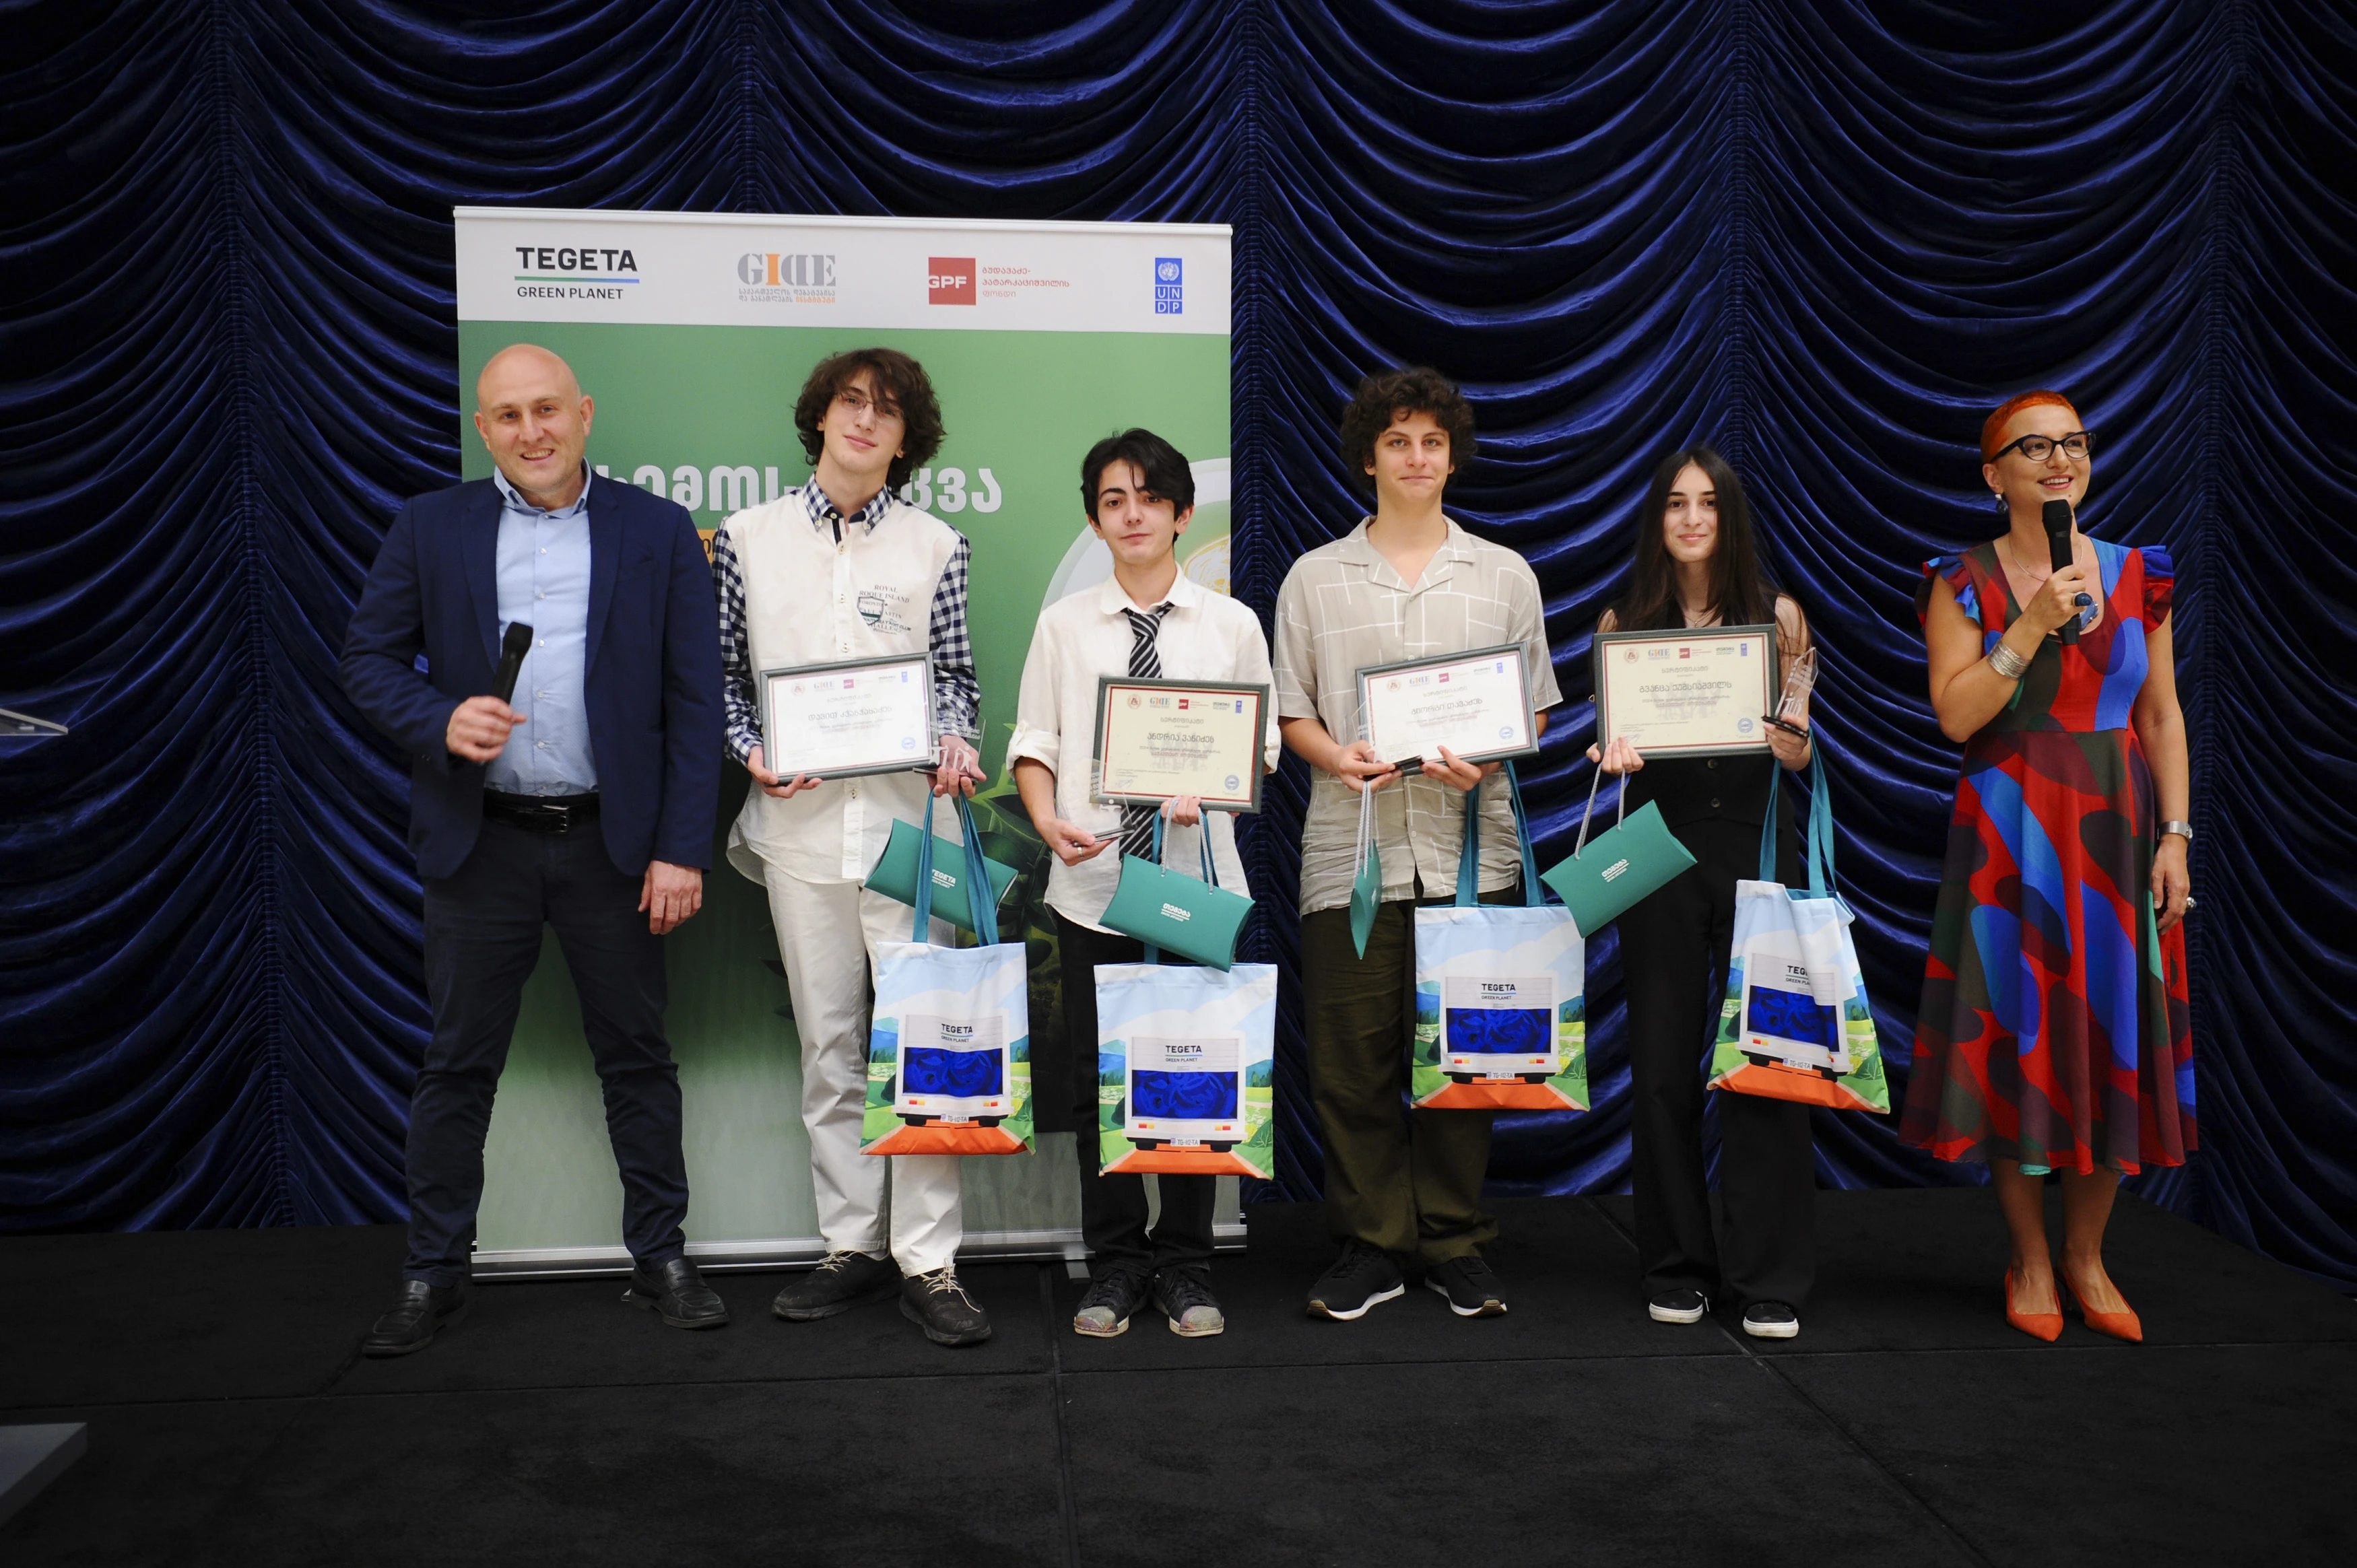 Tegeta Green Planet awarded the participants of the National Debate Tournament.